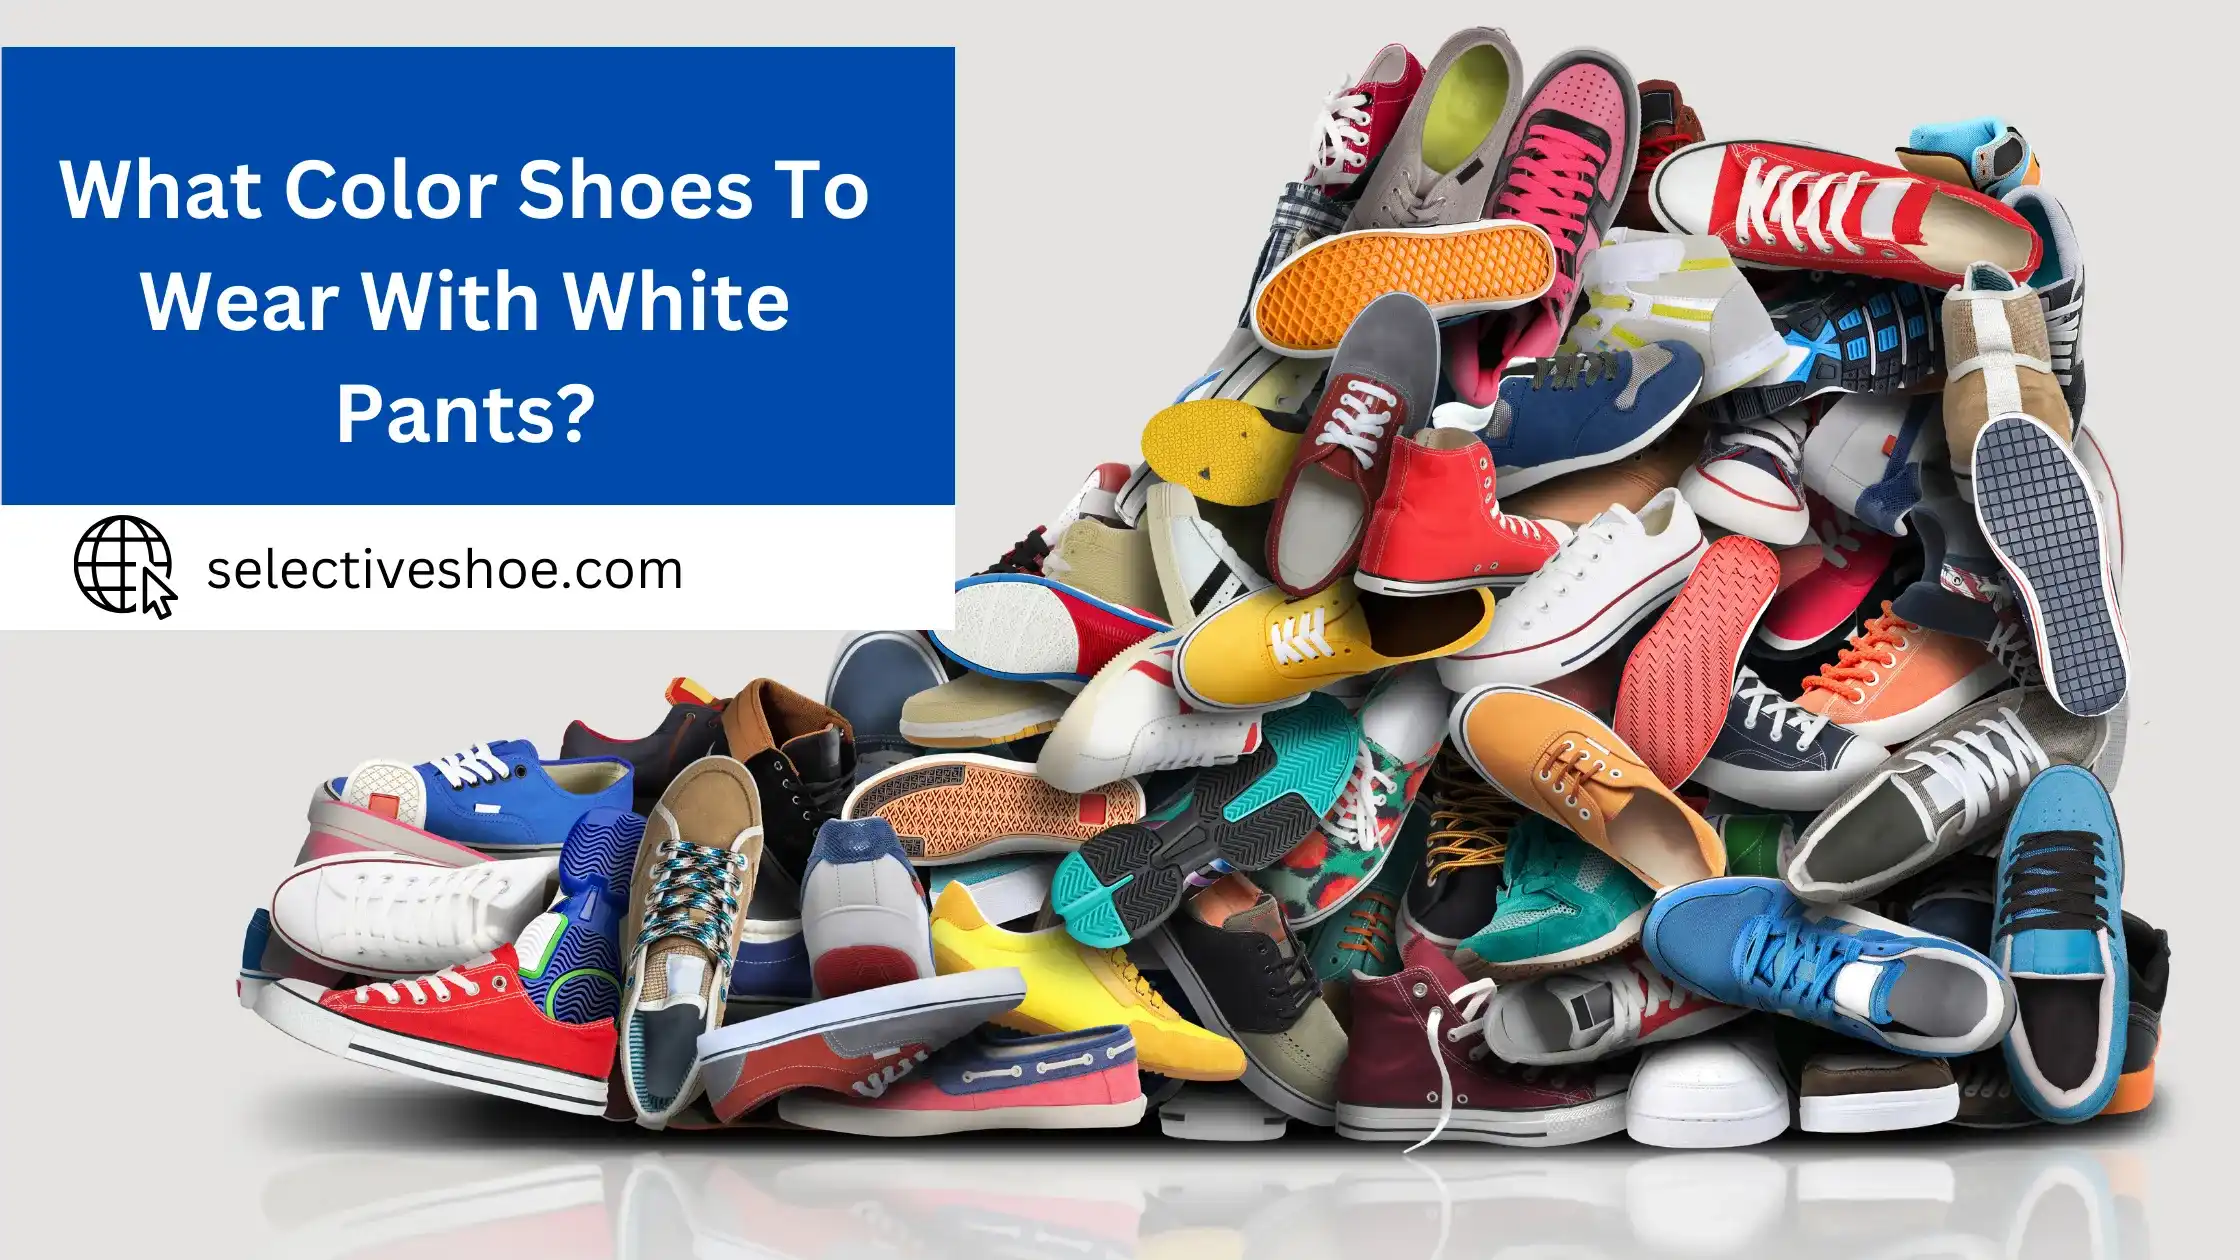 What Color Shoes to Wear With White Pants? Simle Guide